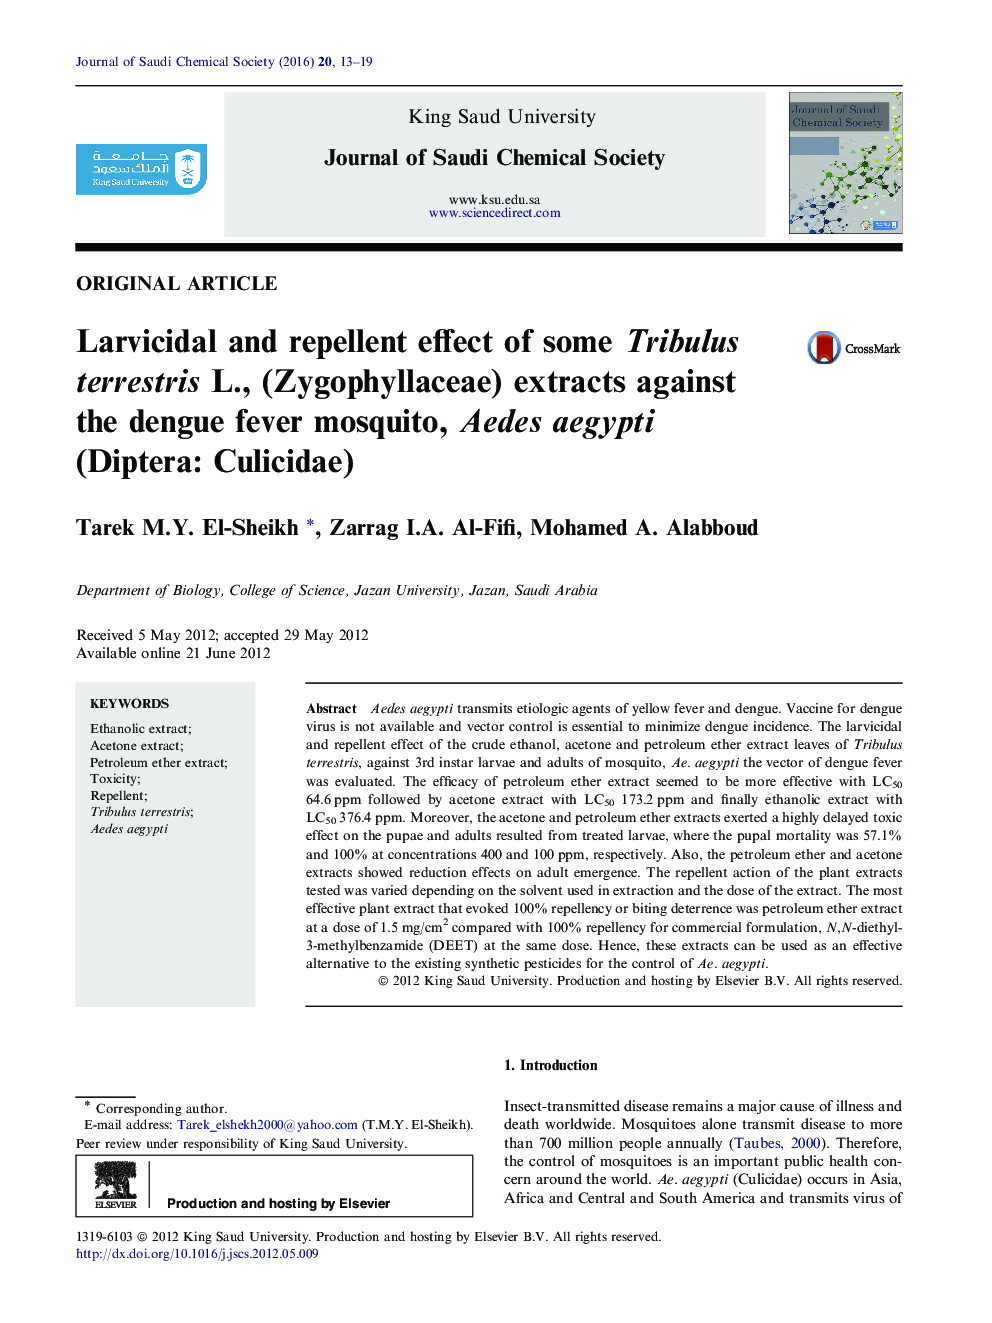 Larvicidal and repellent effect of some Tribulus terrestris L., (Zygophyllaceae) extracts against the dengue fever mosquito, Aedes aegypti (Diptera: Culicidae) 